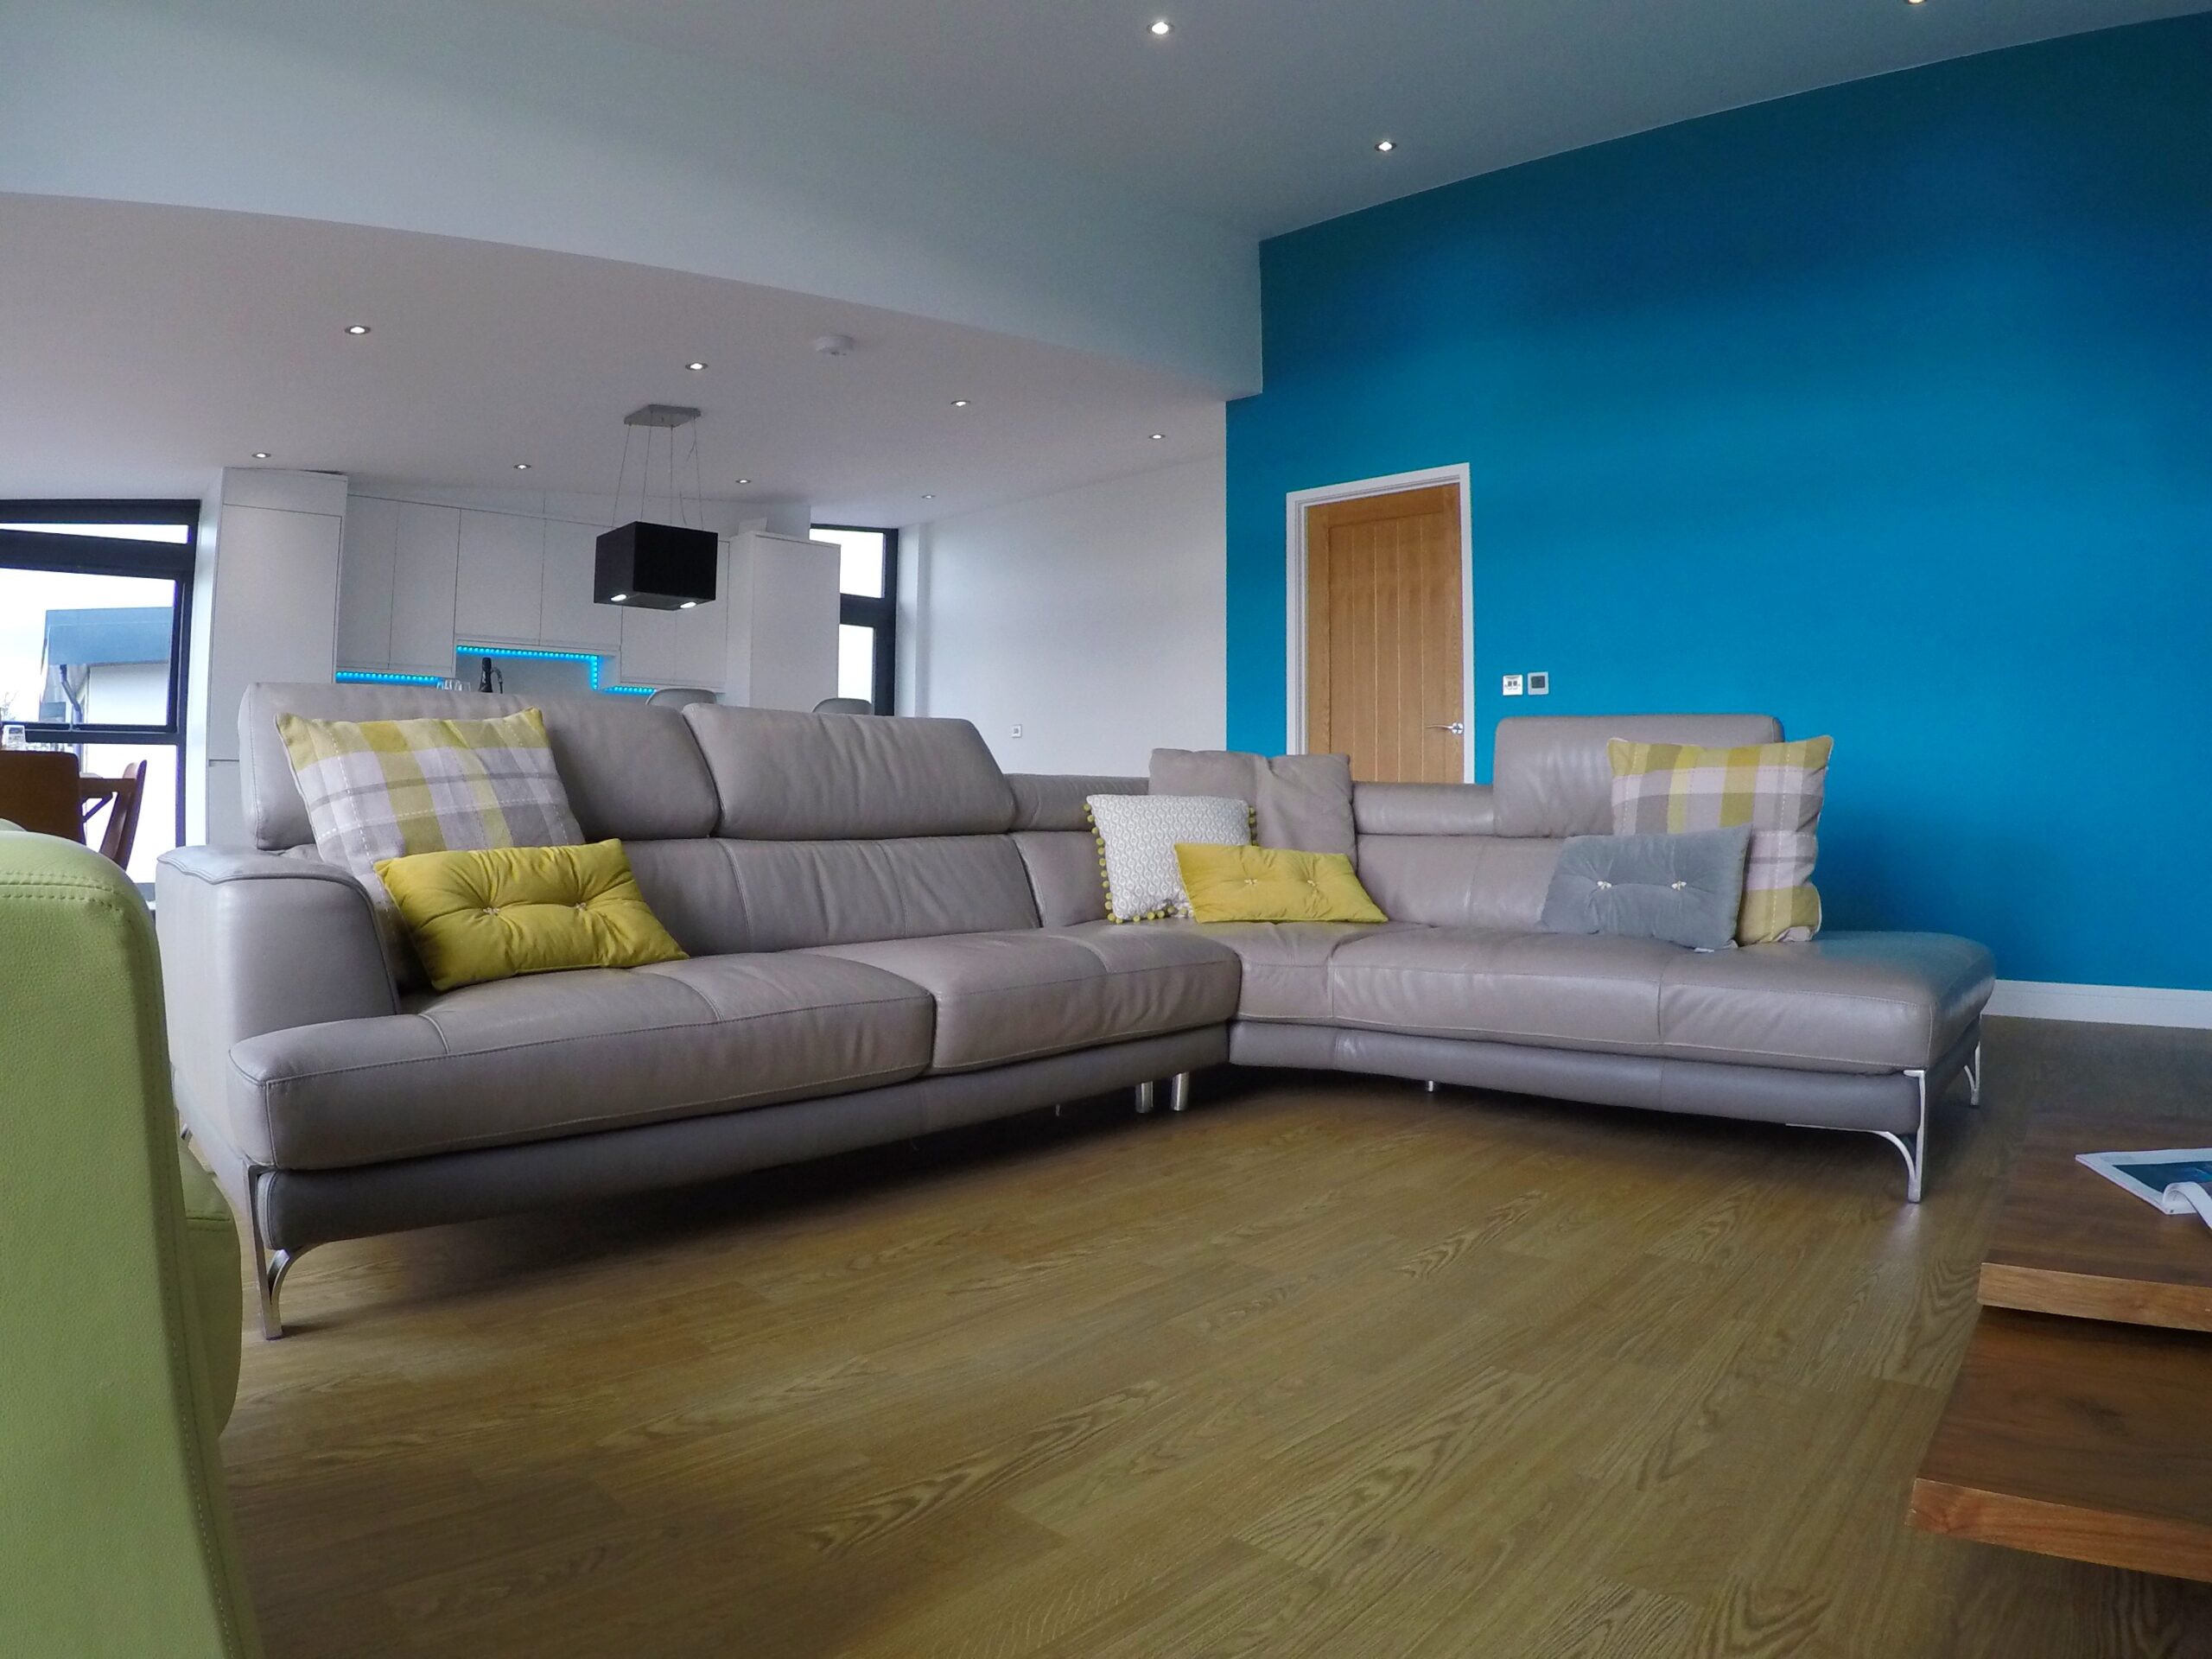 Large leather corner settee in grey with scatter cushions in check and mustard. Teale coloured wall and wood effect flooring.